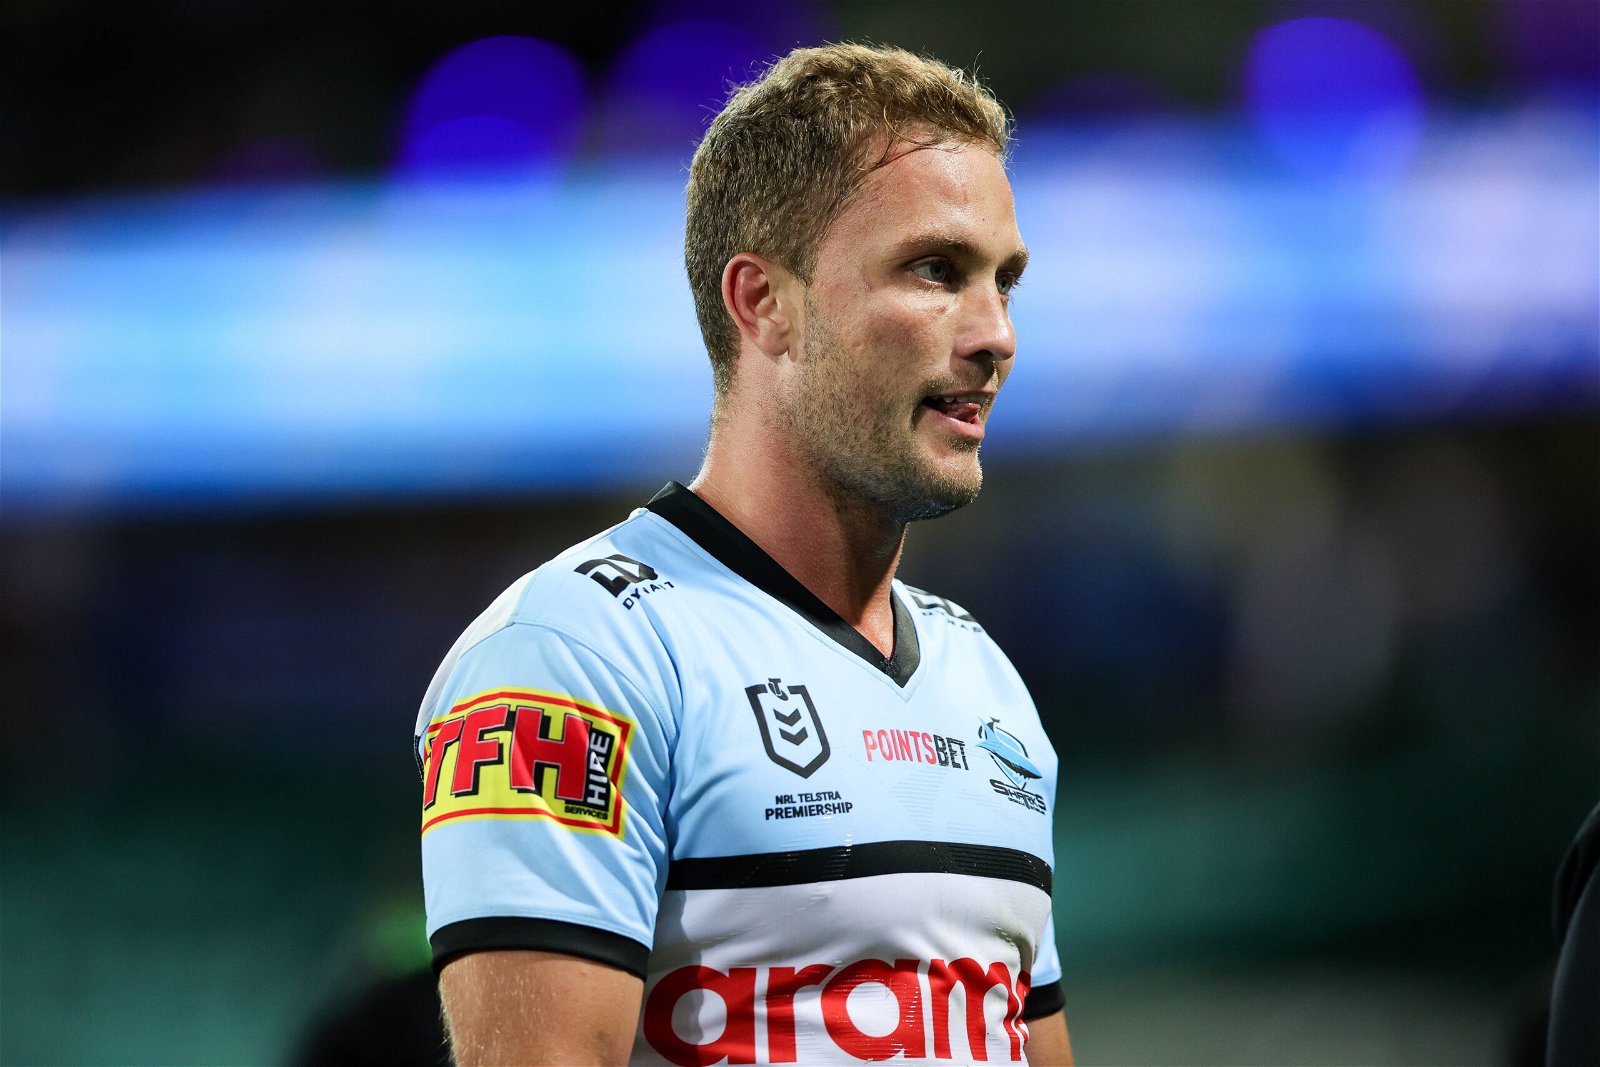 Leigh Leopards signing Matt Moylan marked one of the biggest off-season transfers